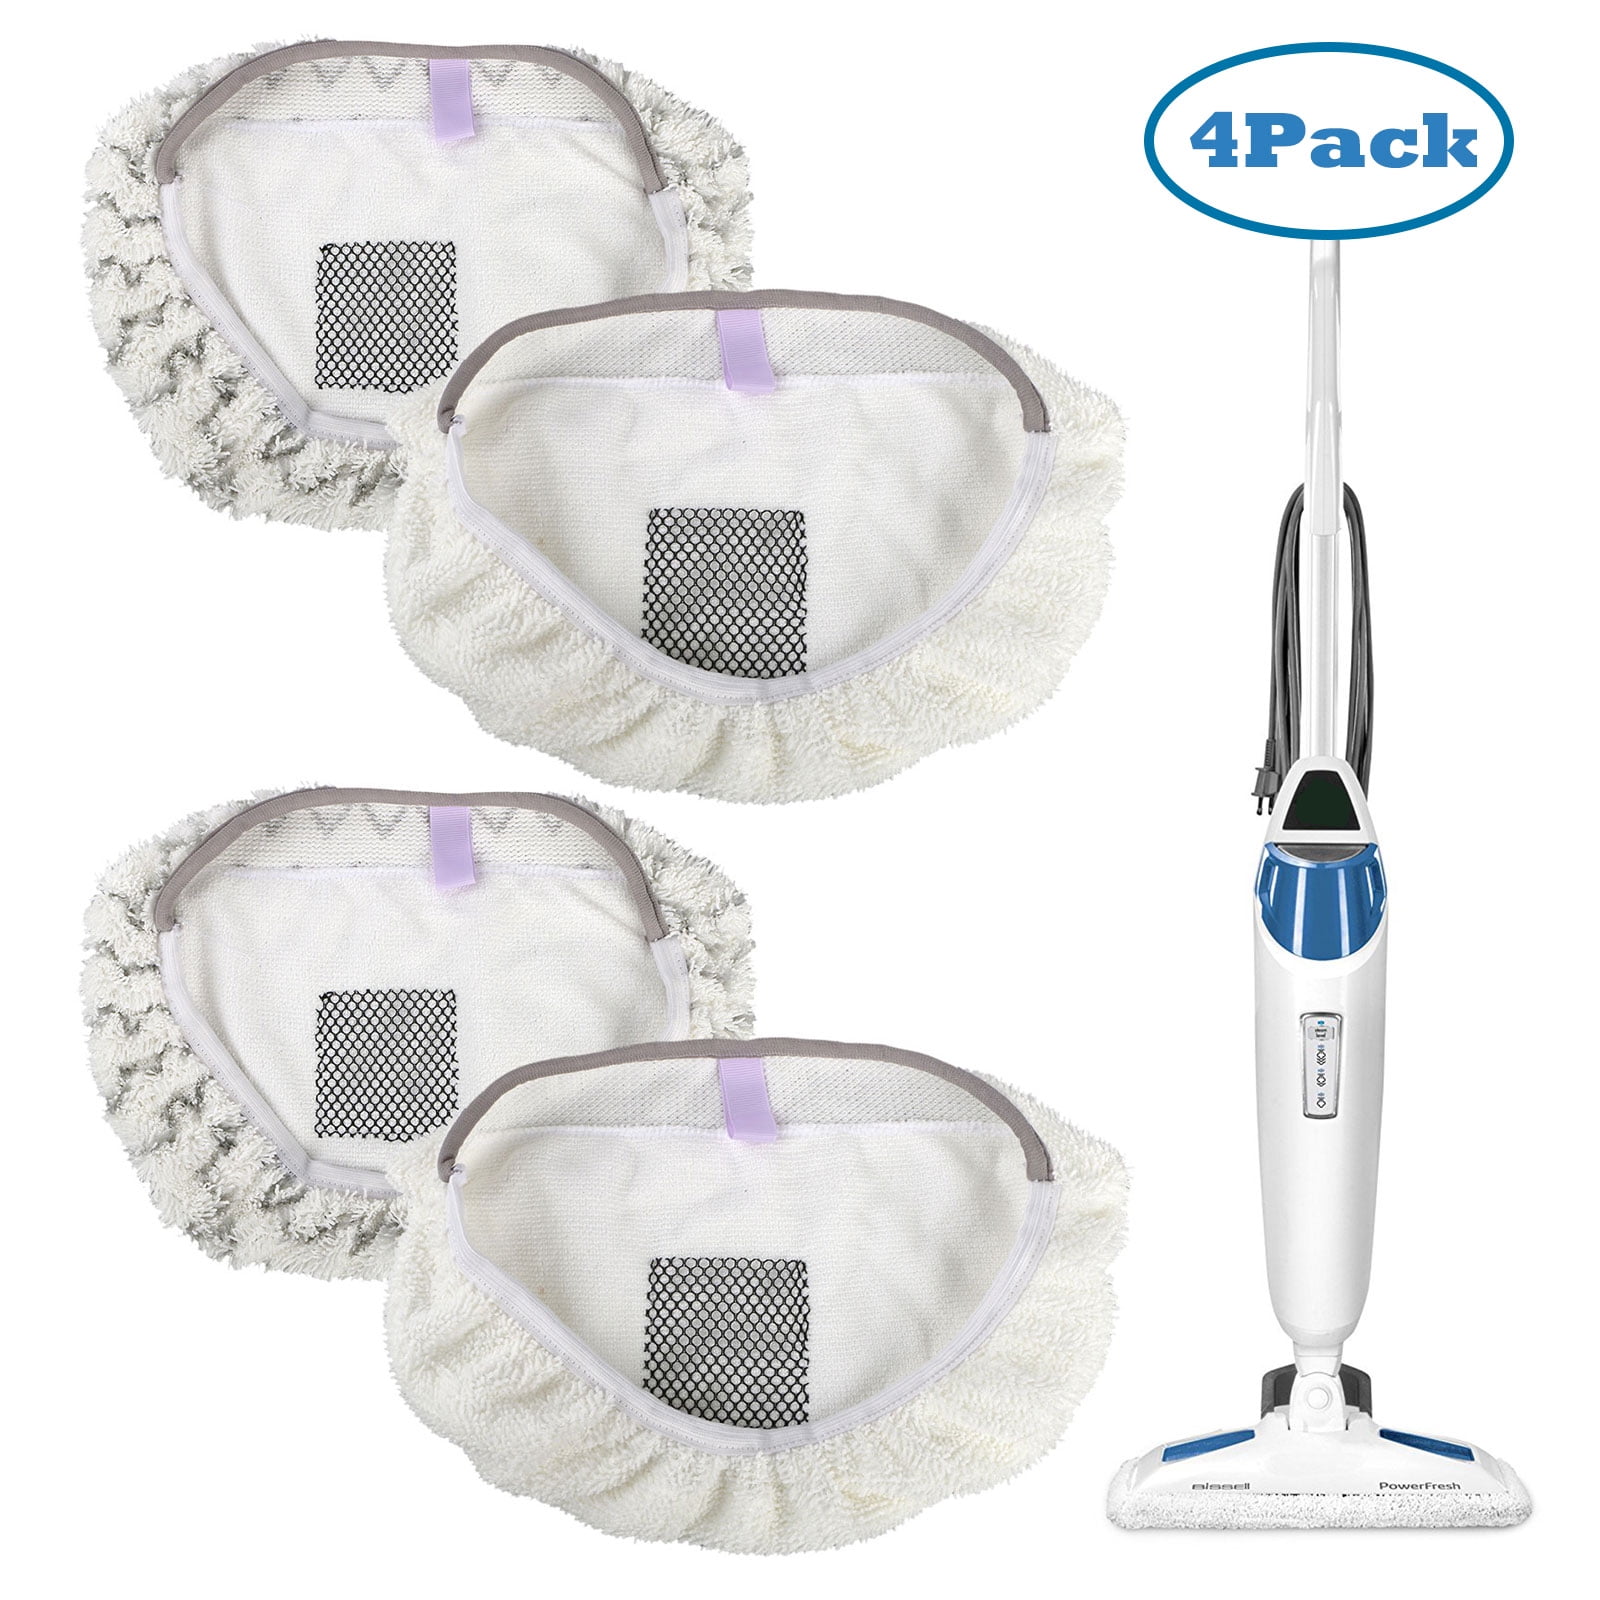 Details about   5 Steam Mop Pads fits Bissell PowerFresh Pad 1940 203-2633 19402 19404 19408 